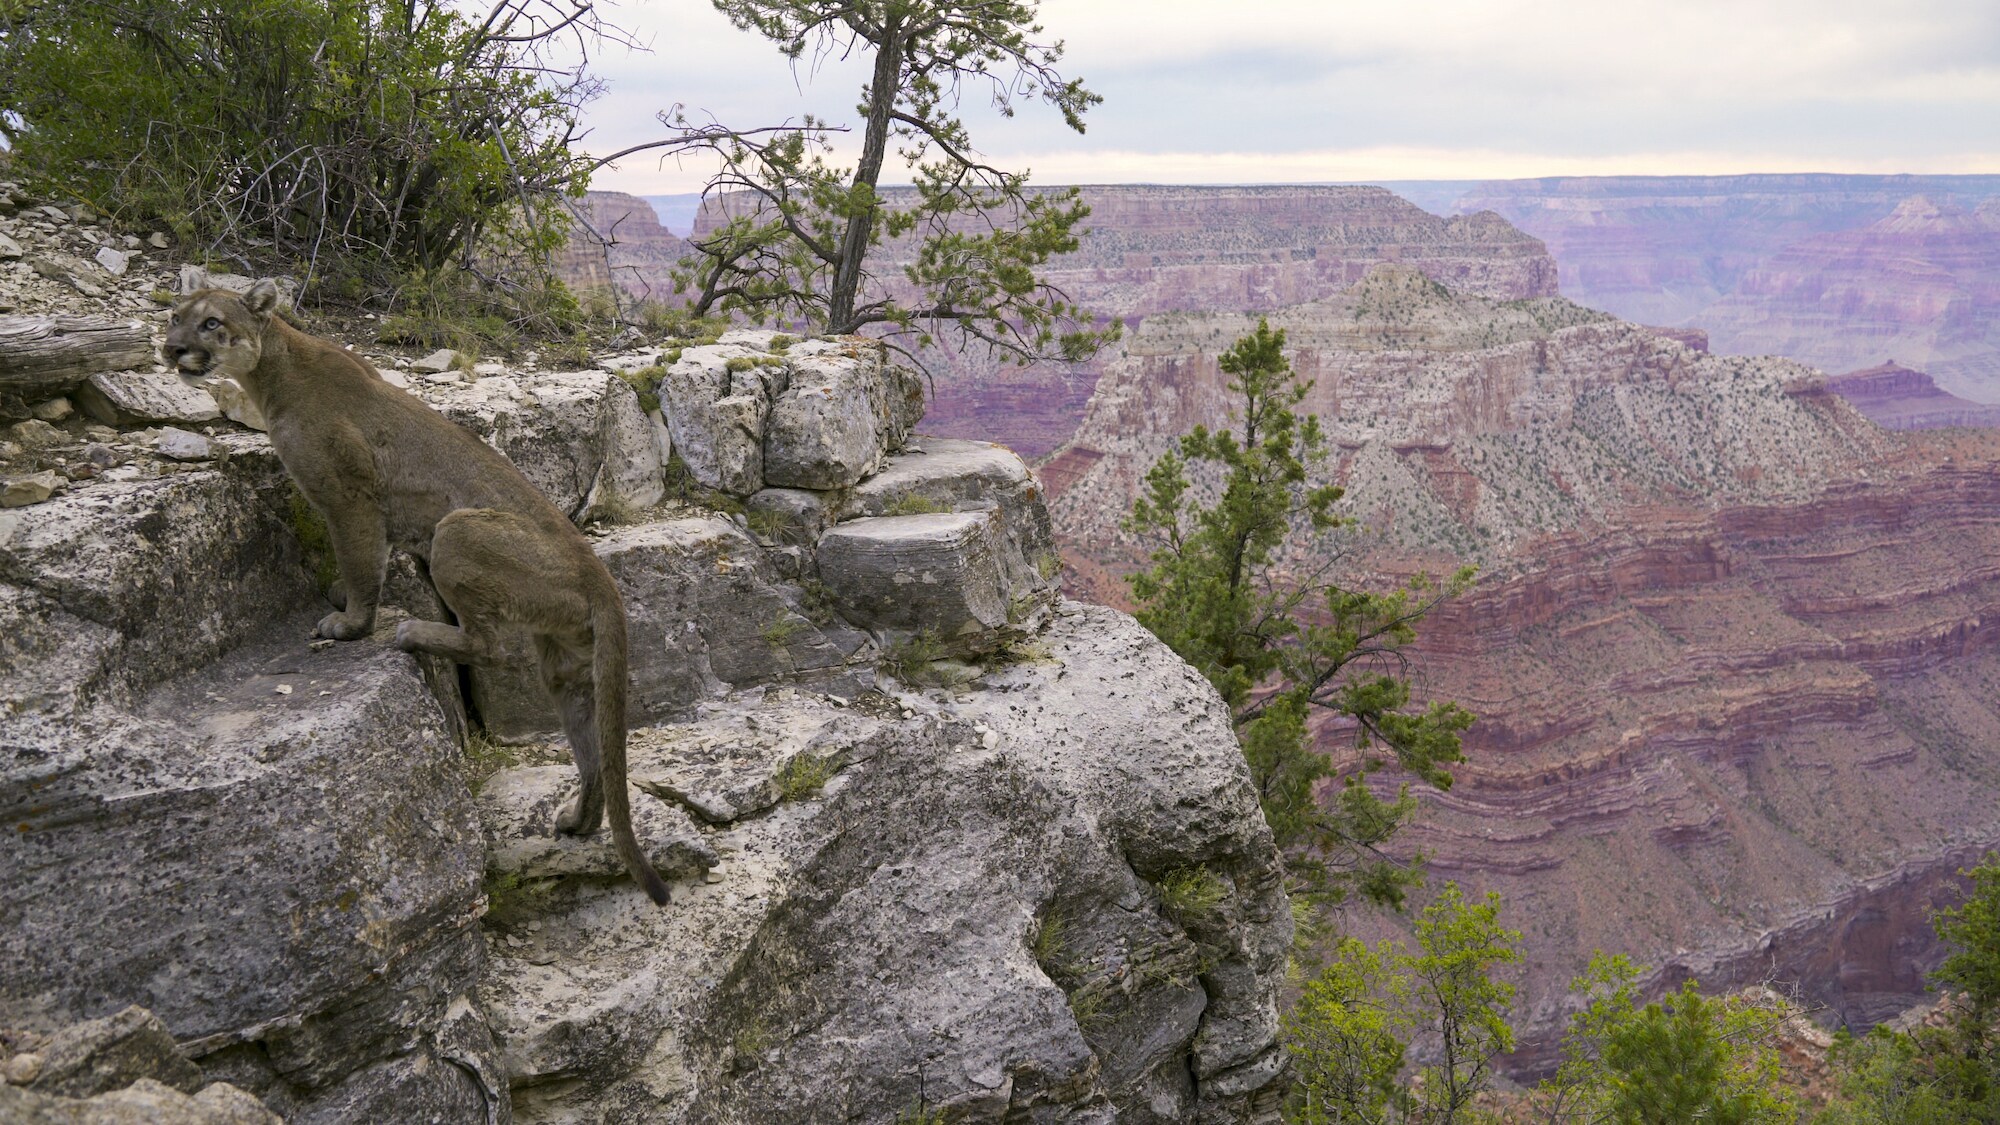 Never filmed before, a mountain lion navigates the sheer cliffs along rim of the Grand Canyon, AZ. (National Geographic for Disney+)